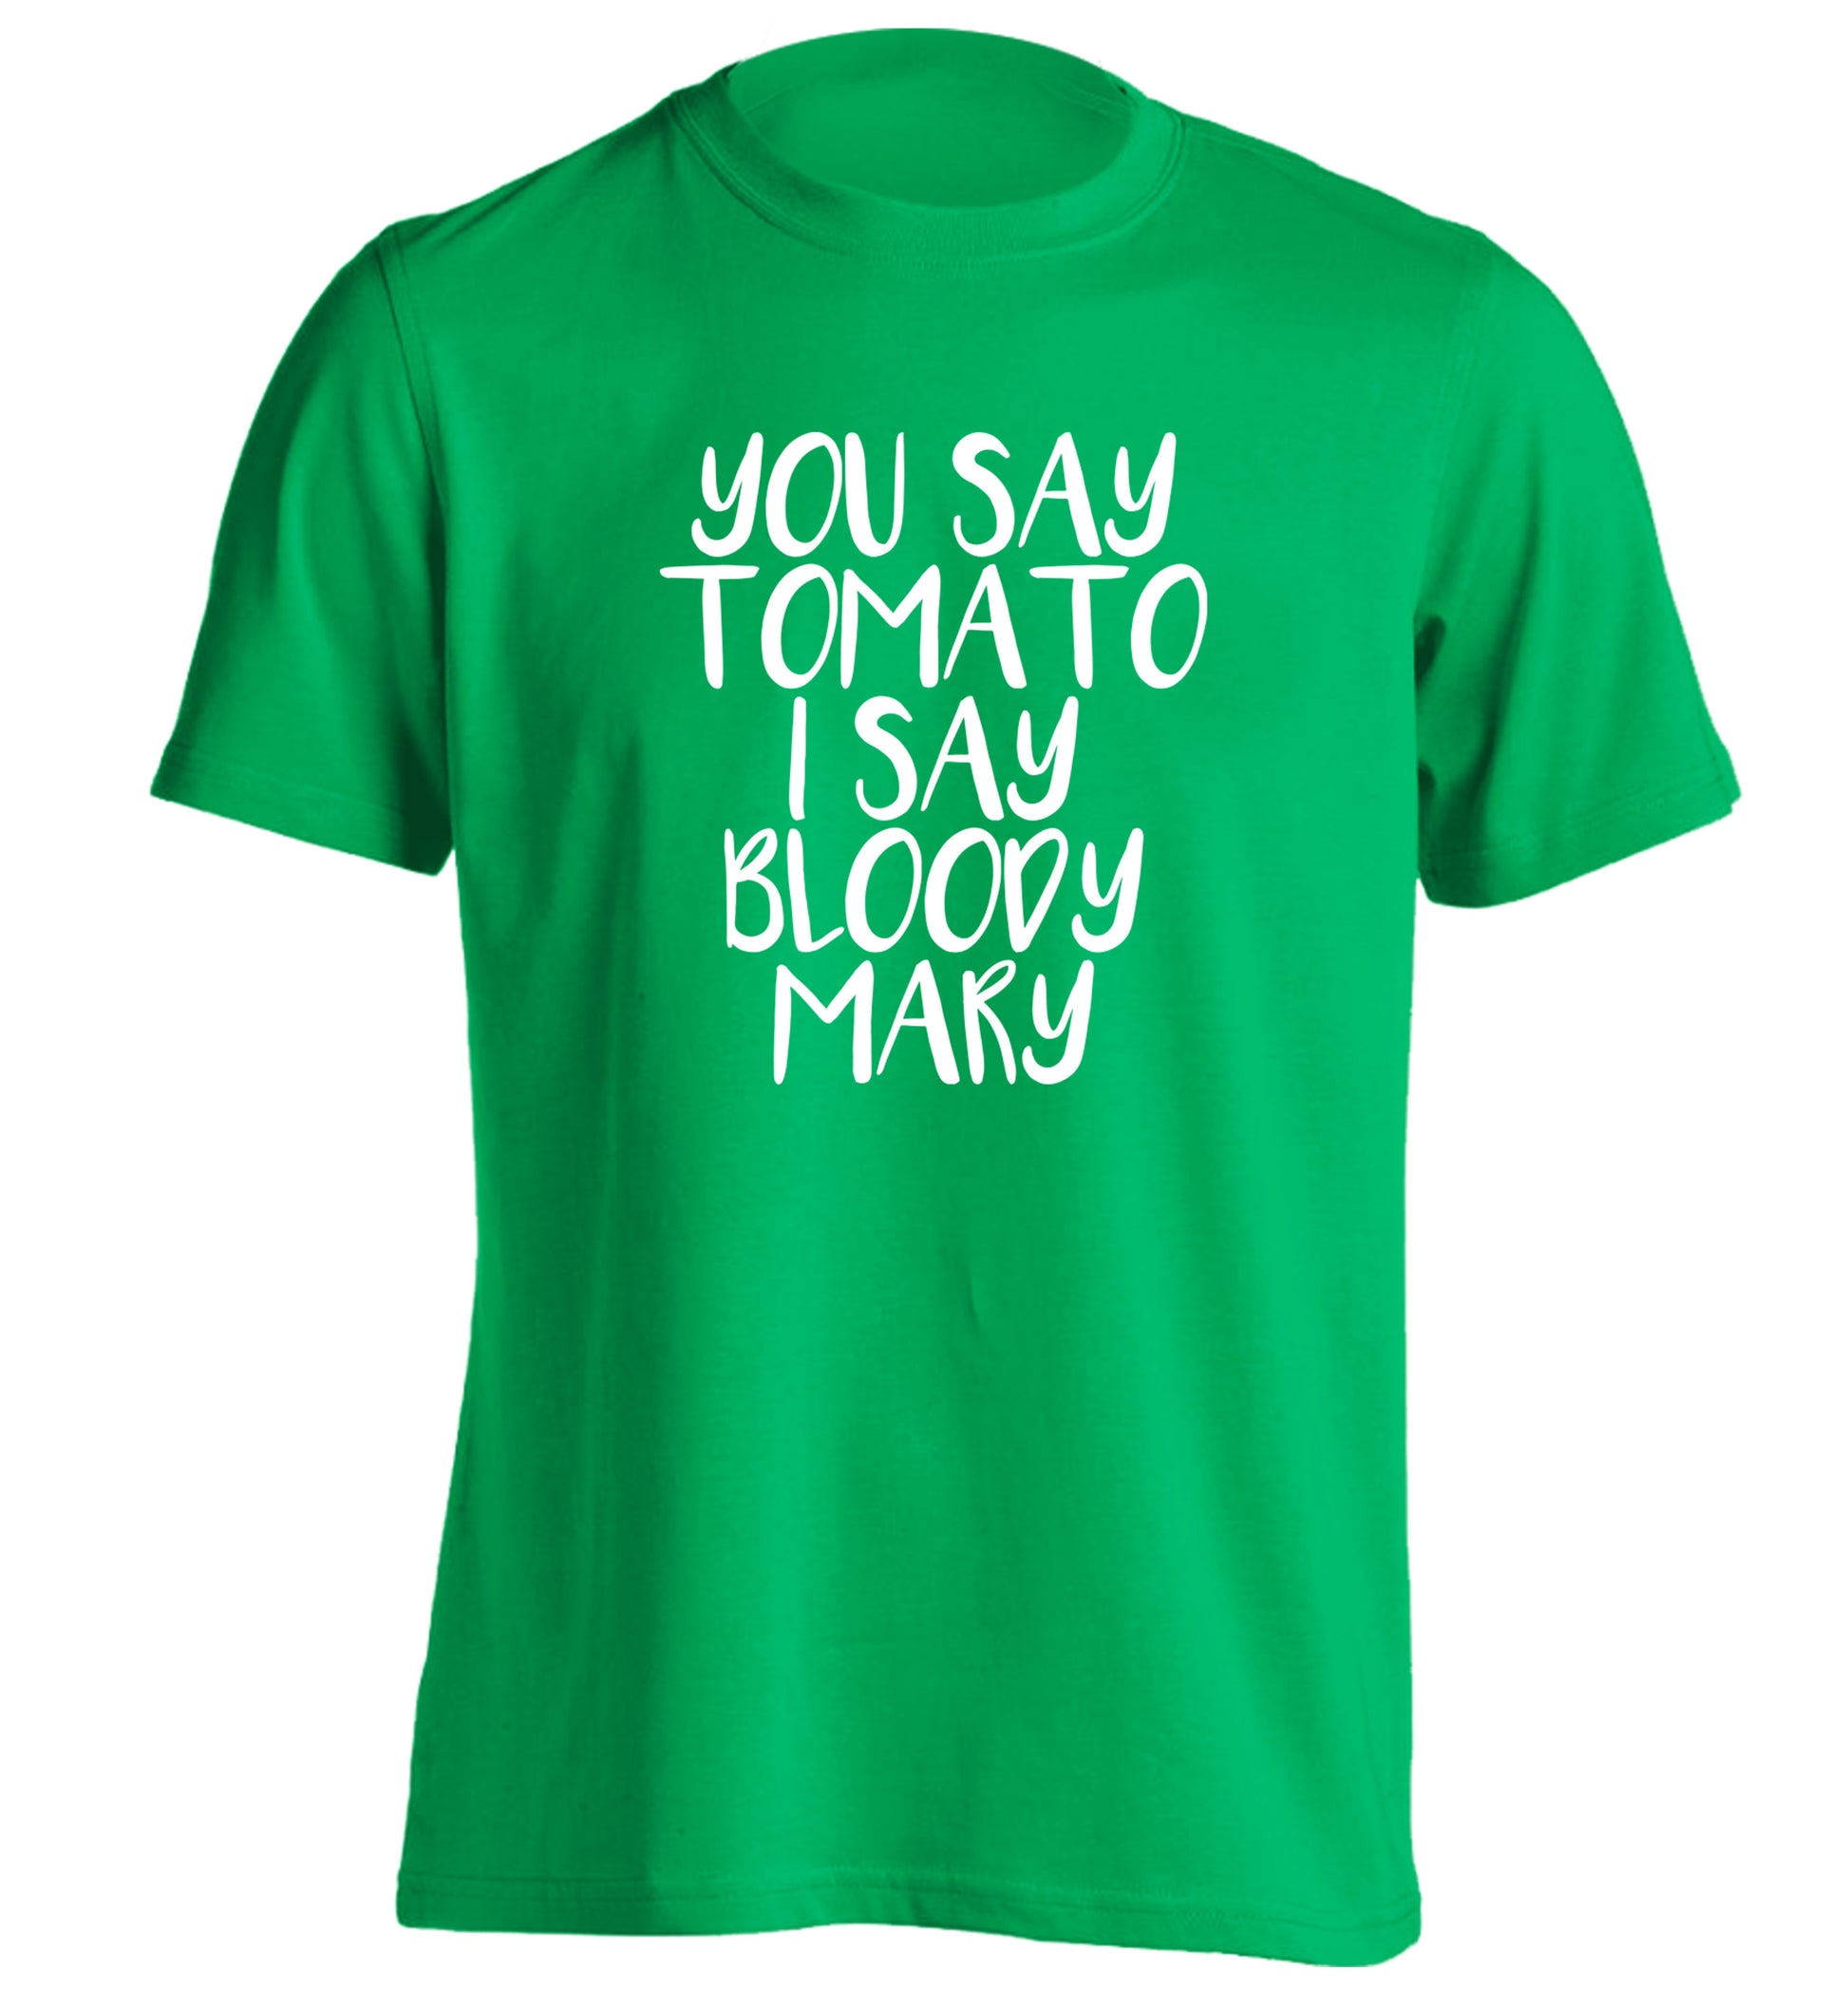 You say tomato I say bloody mary adults unisex green Tshirt 2XL